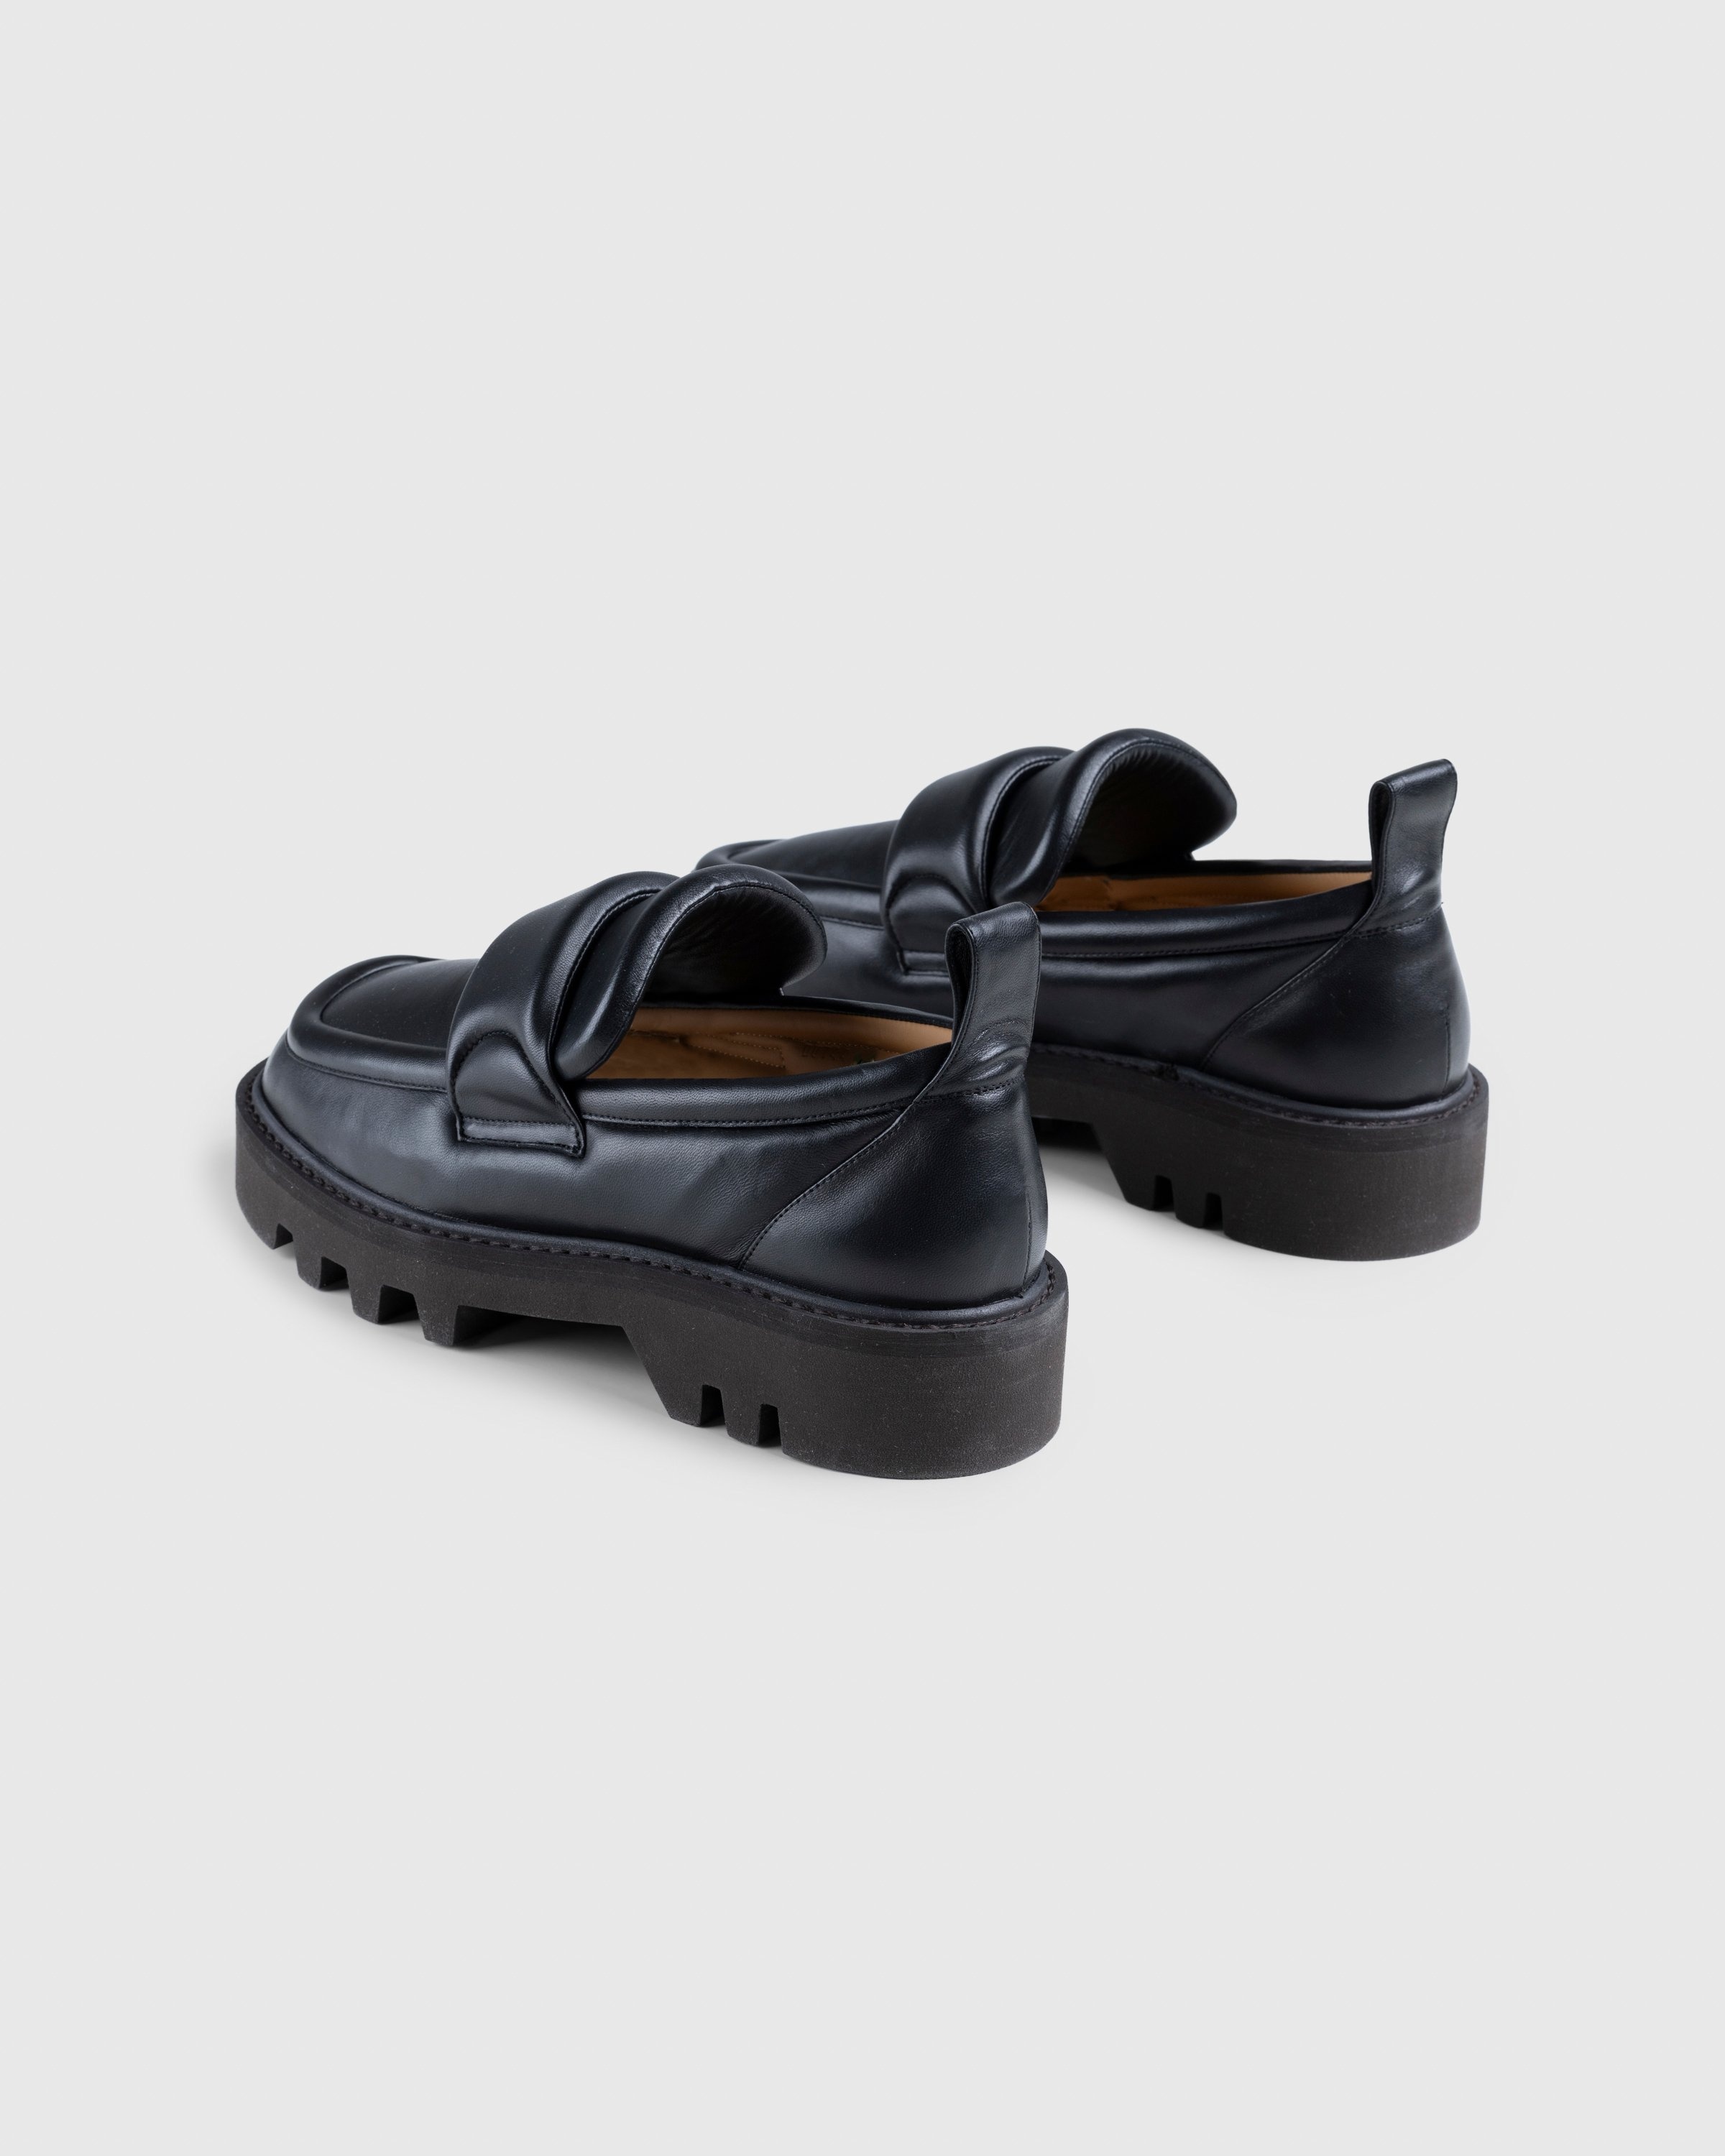 Dries van Noten – Padded Leather Loafers Black - Sandals - Black - Image 5